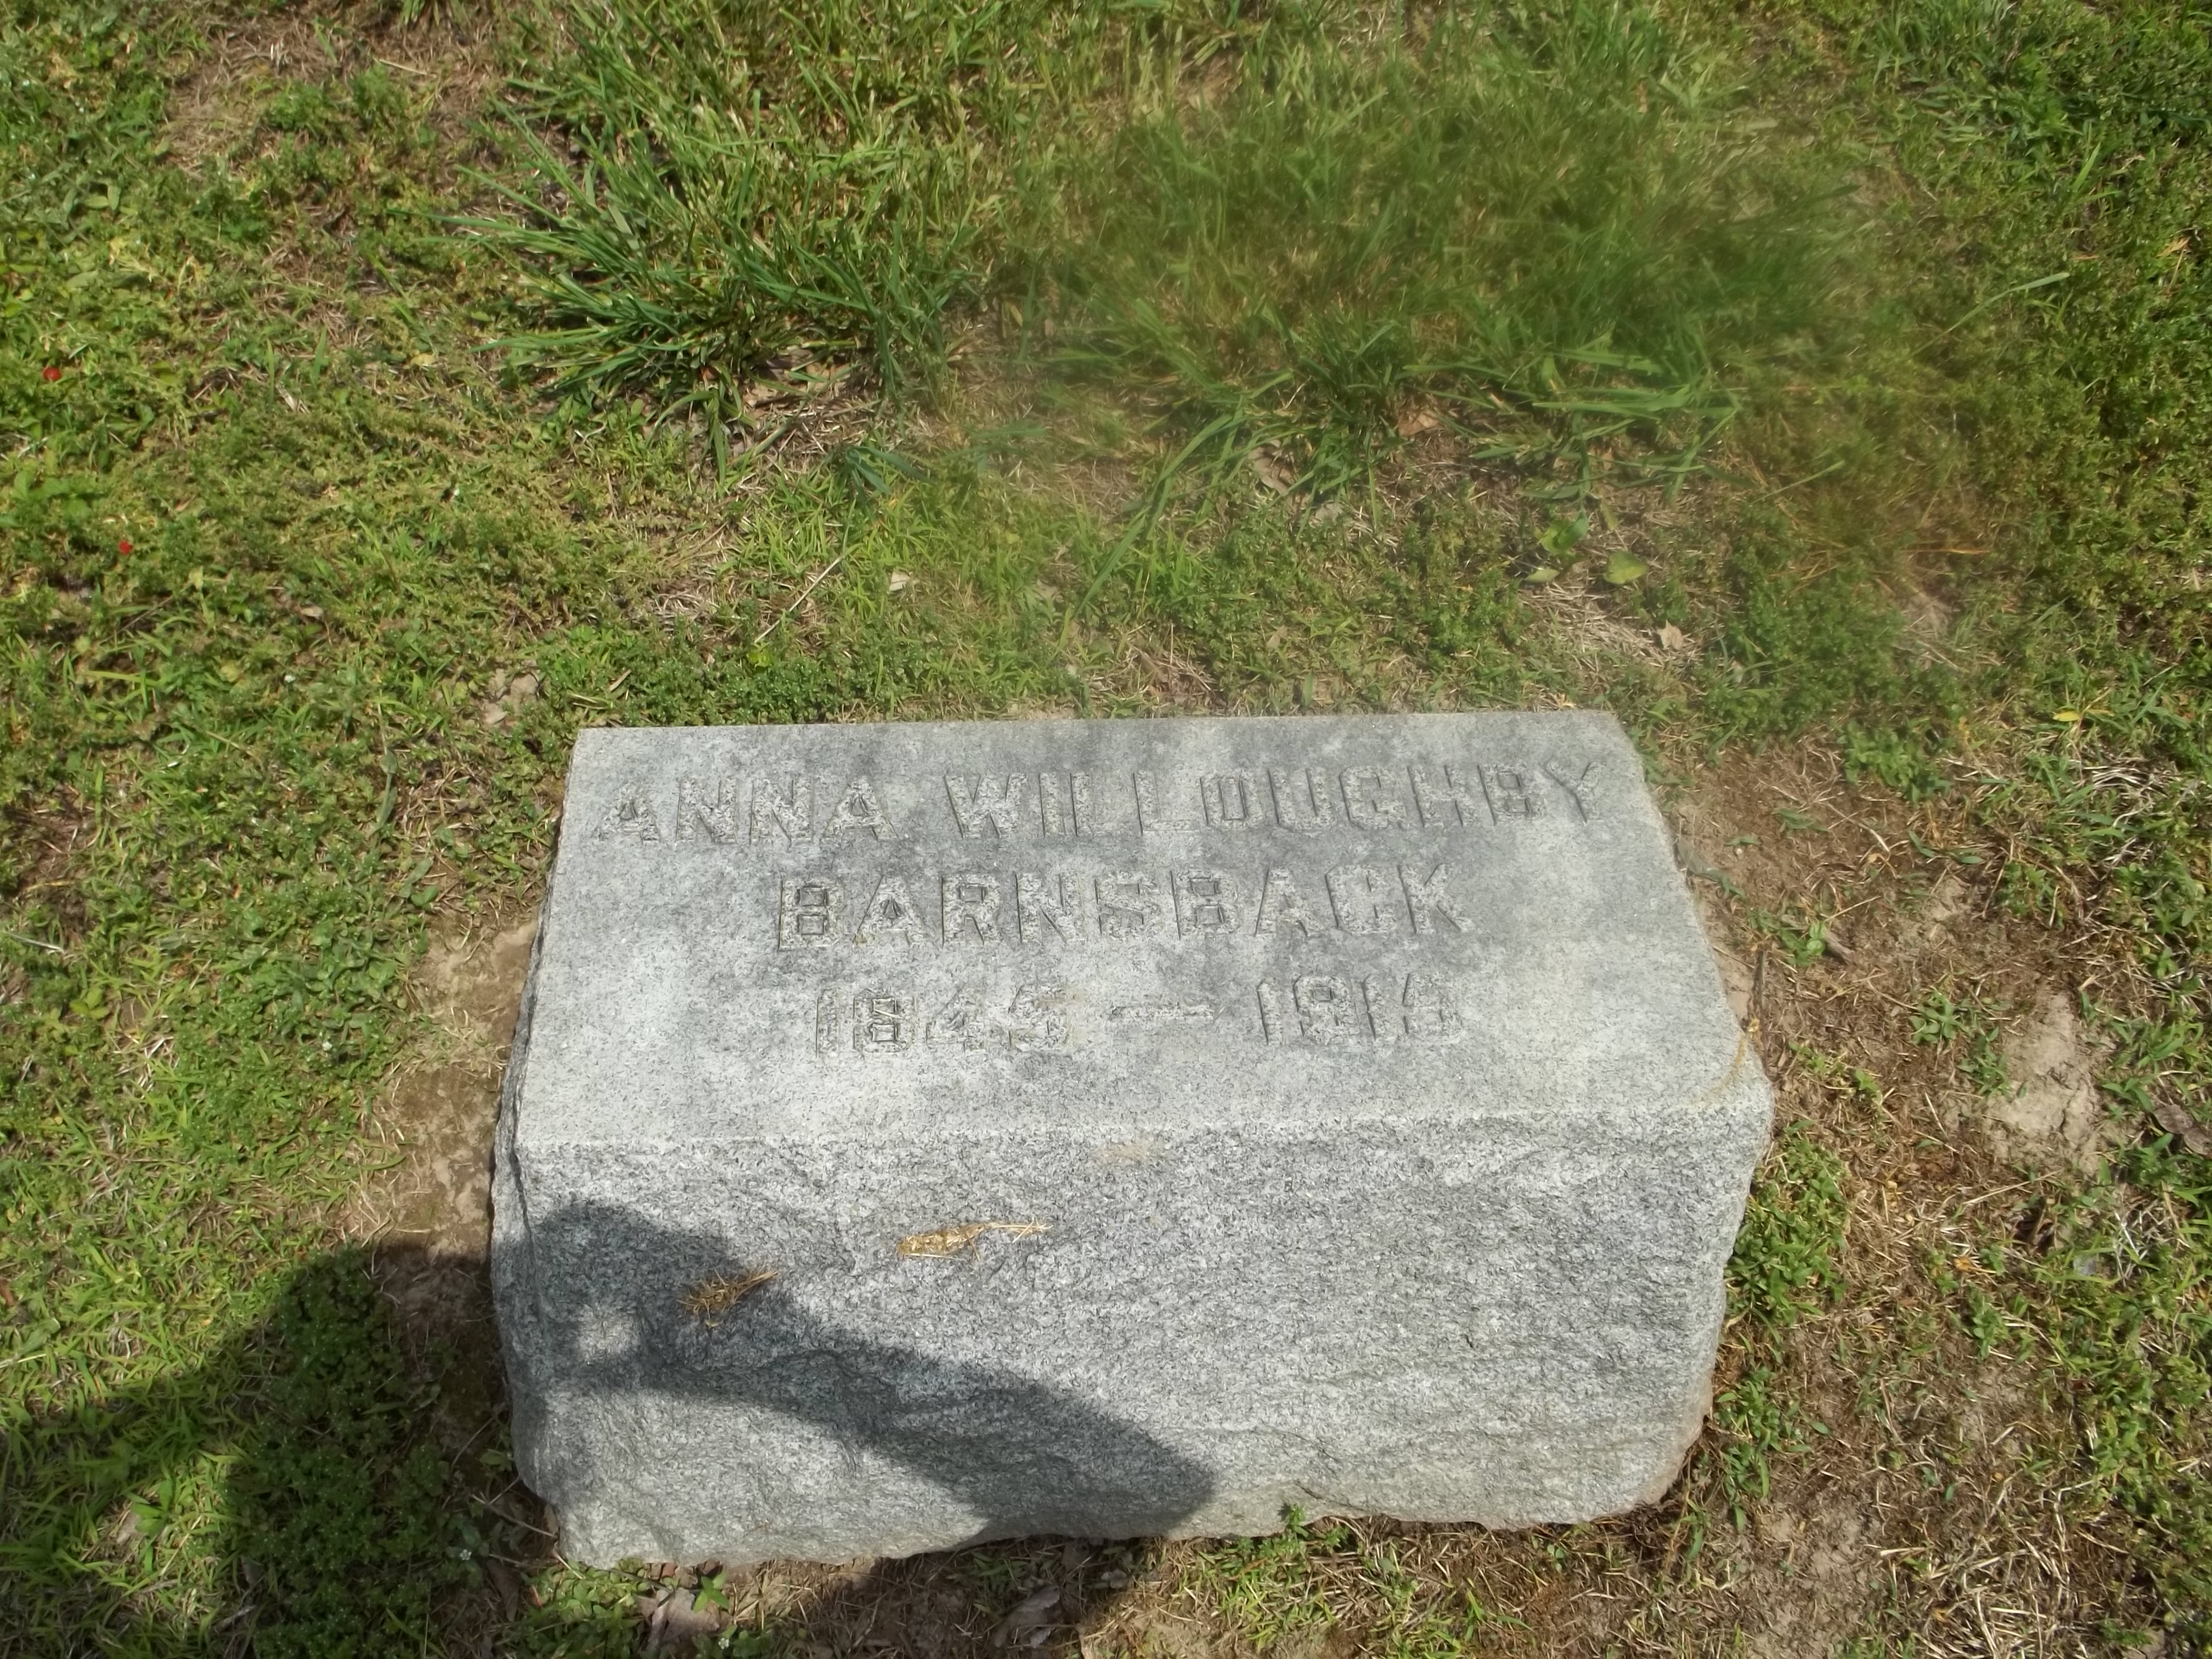 Anna Willoughby Barnsback Headstone